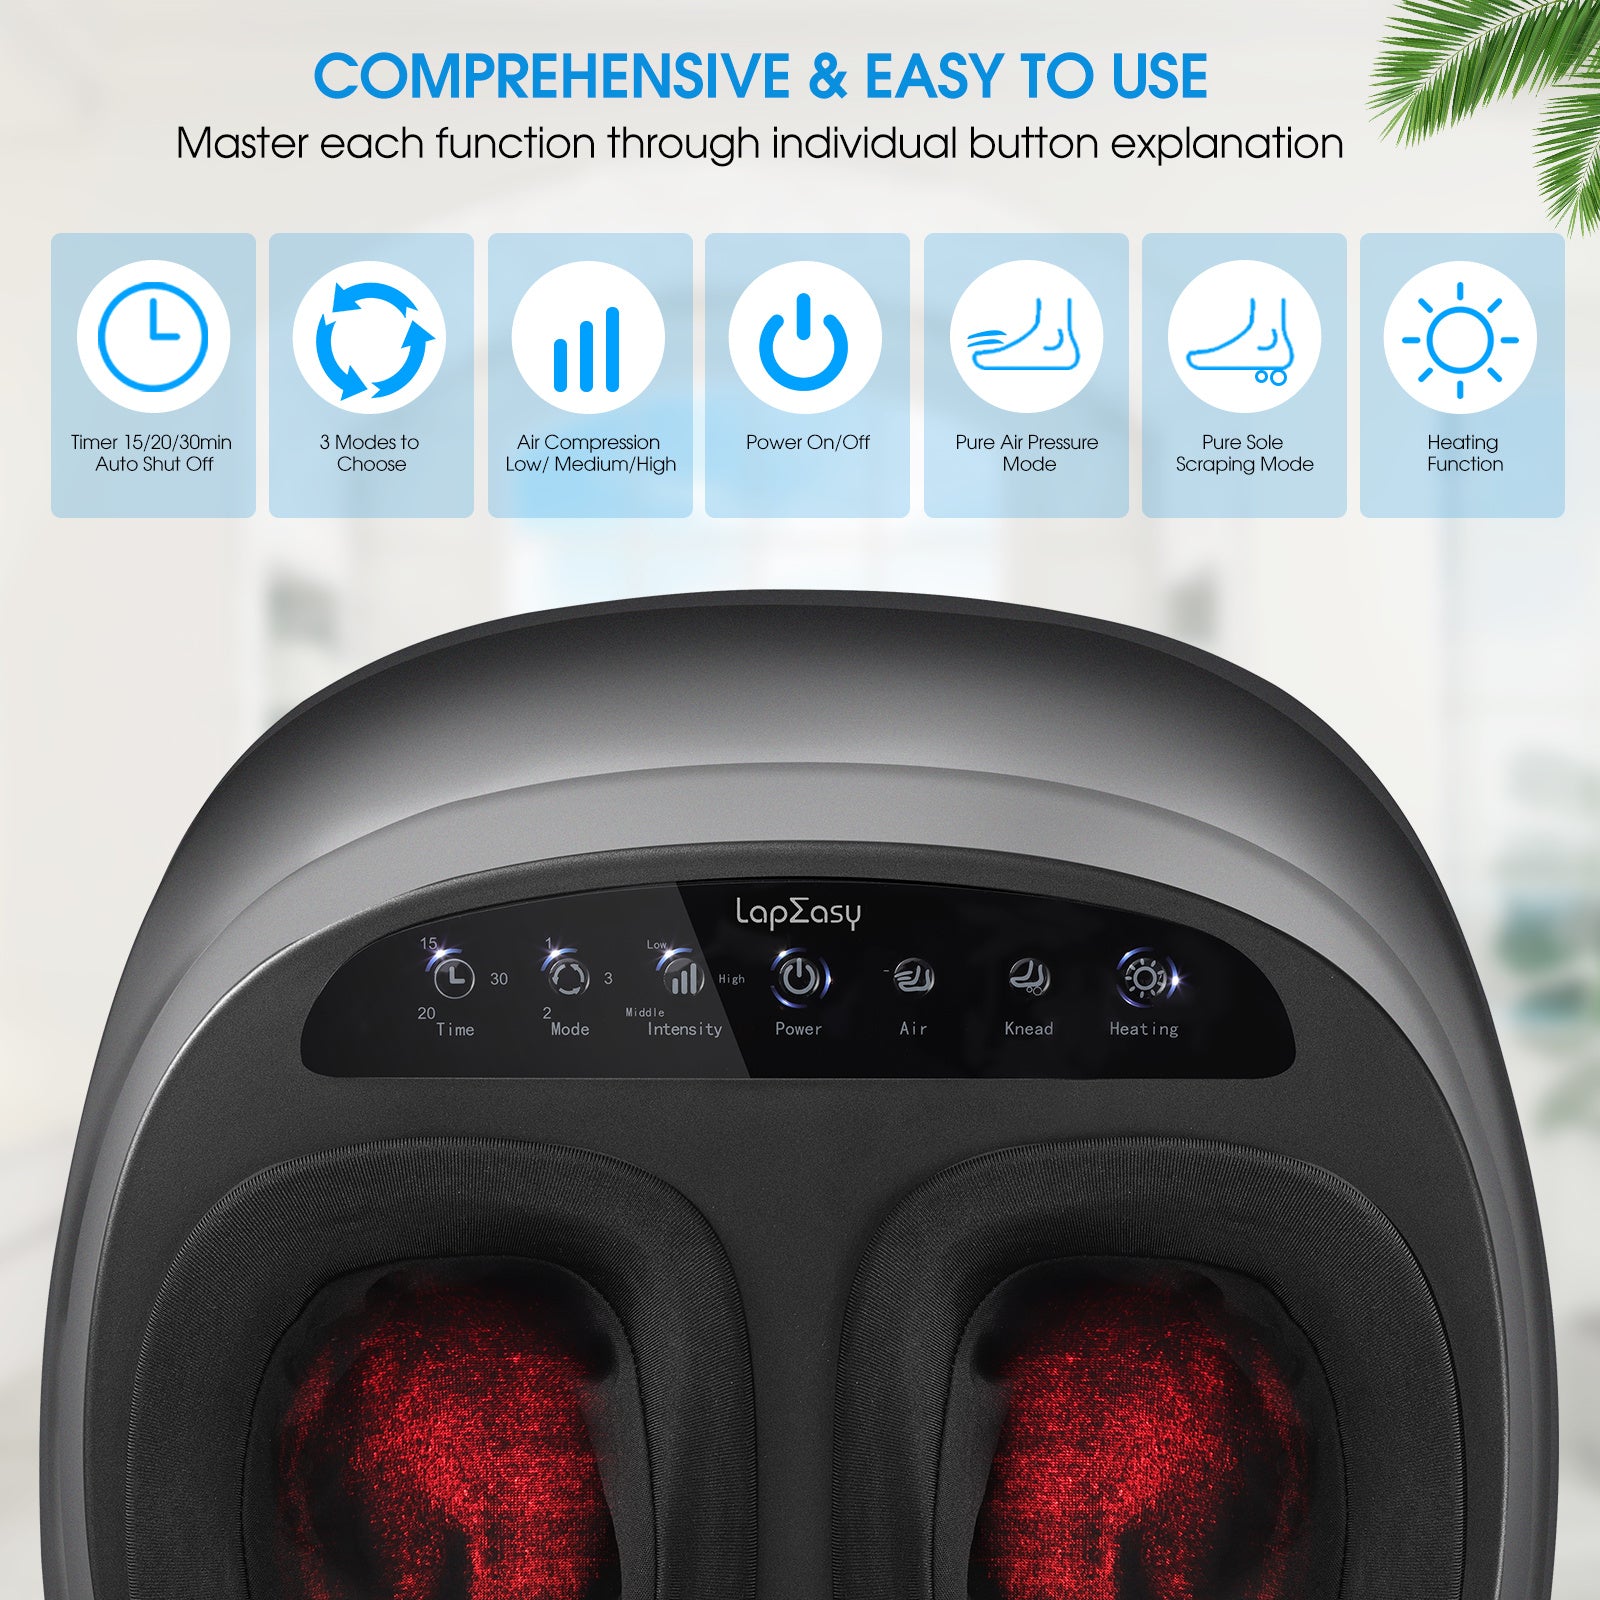 Image of a comprehensive guide on how to use the Foot Massager Machine with Heat